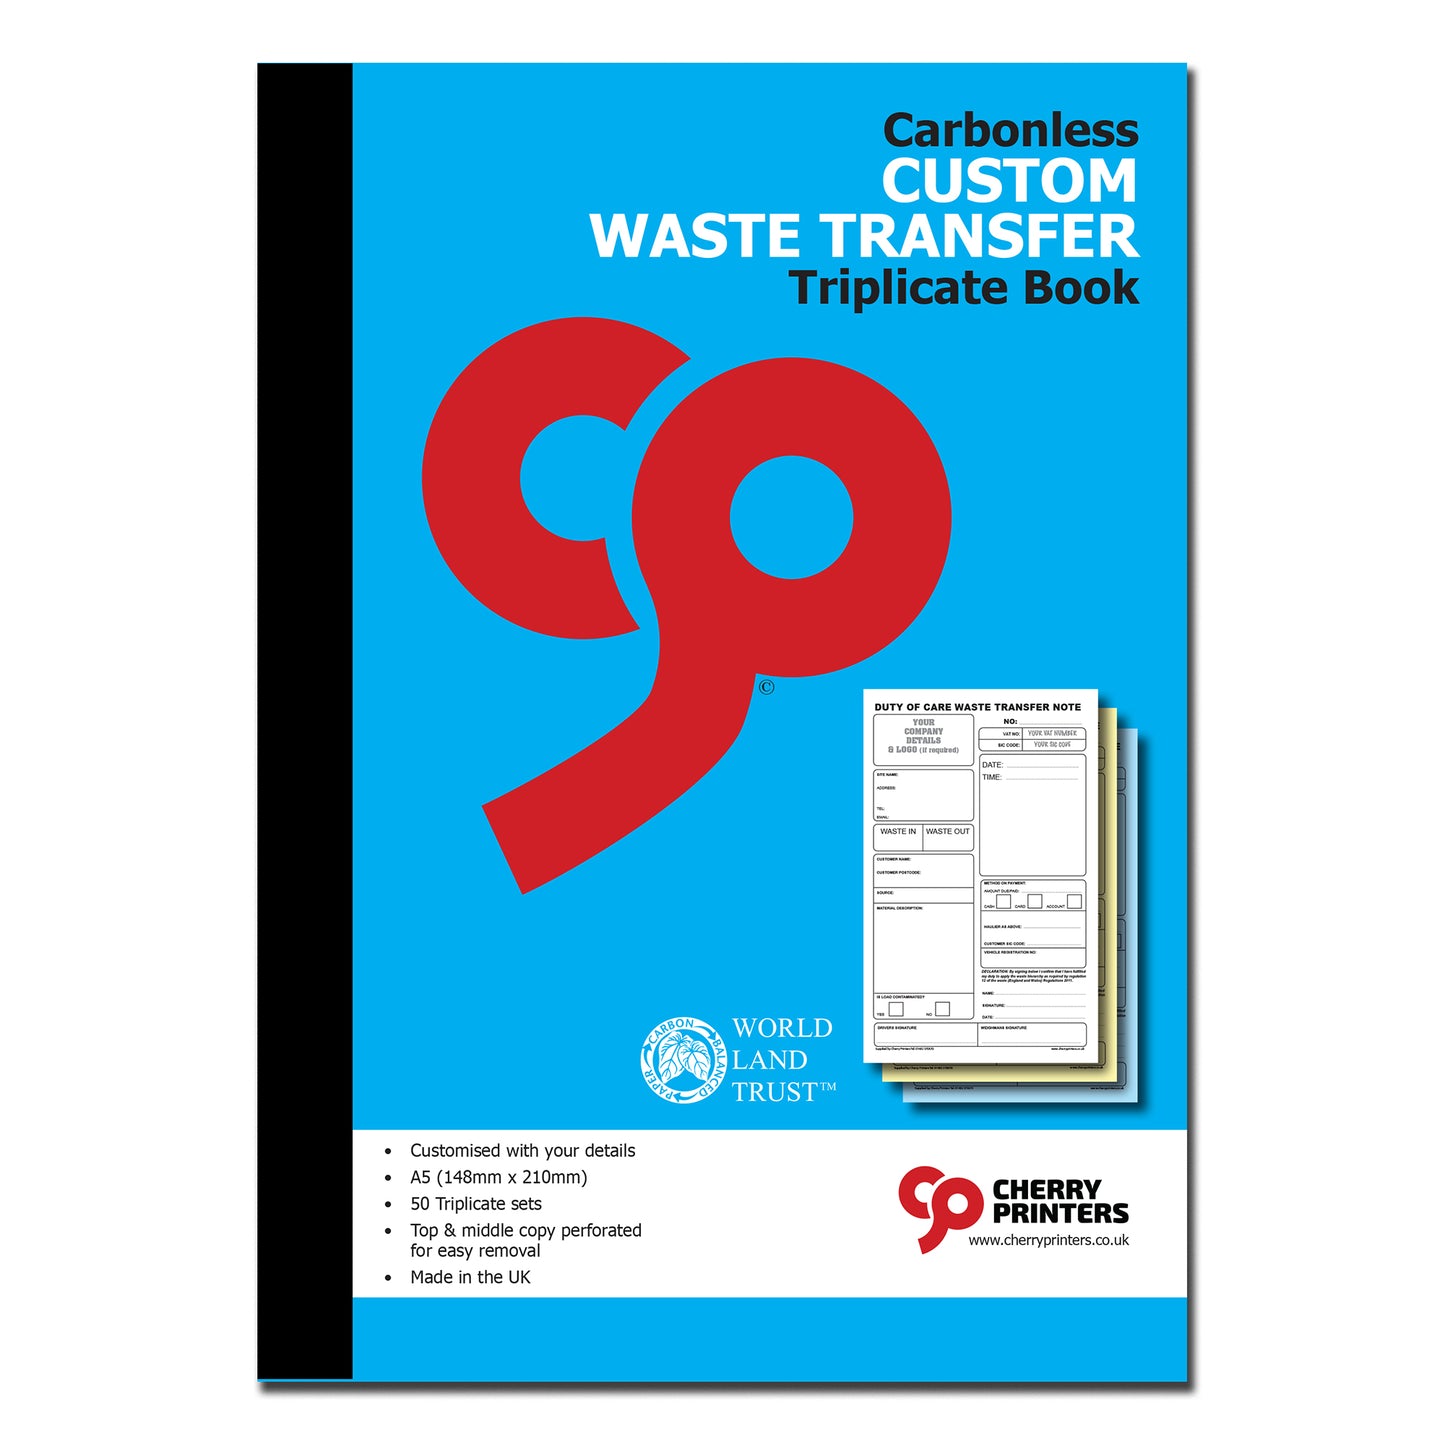 NCR *CUSTOM* Duty of Care Waste Transfer Note Triplicate Book A5 4 Book Pack